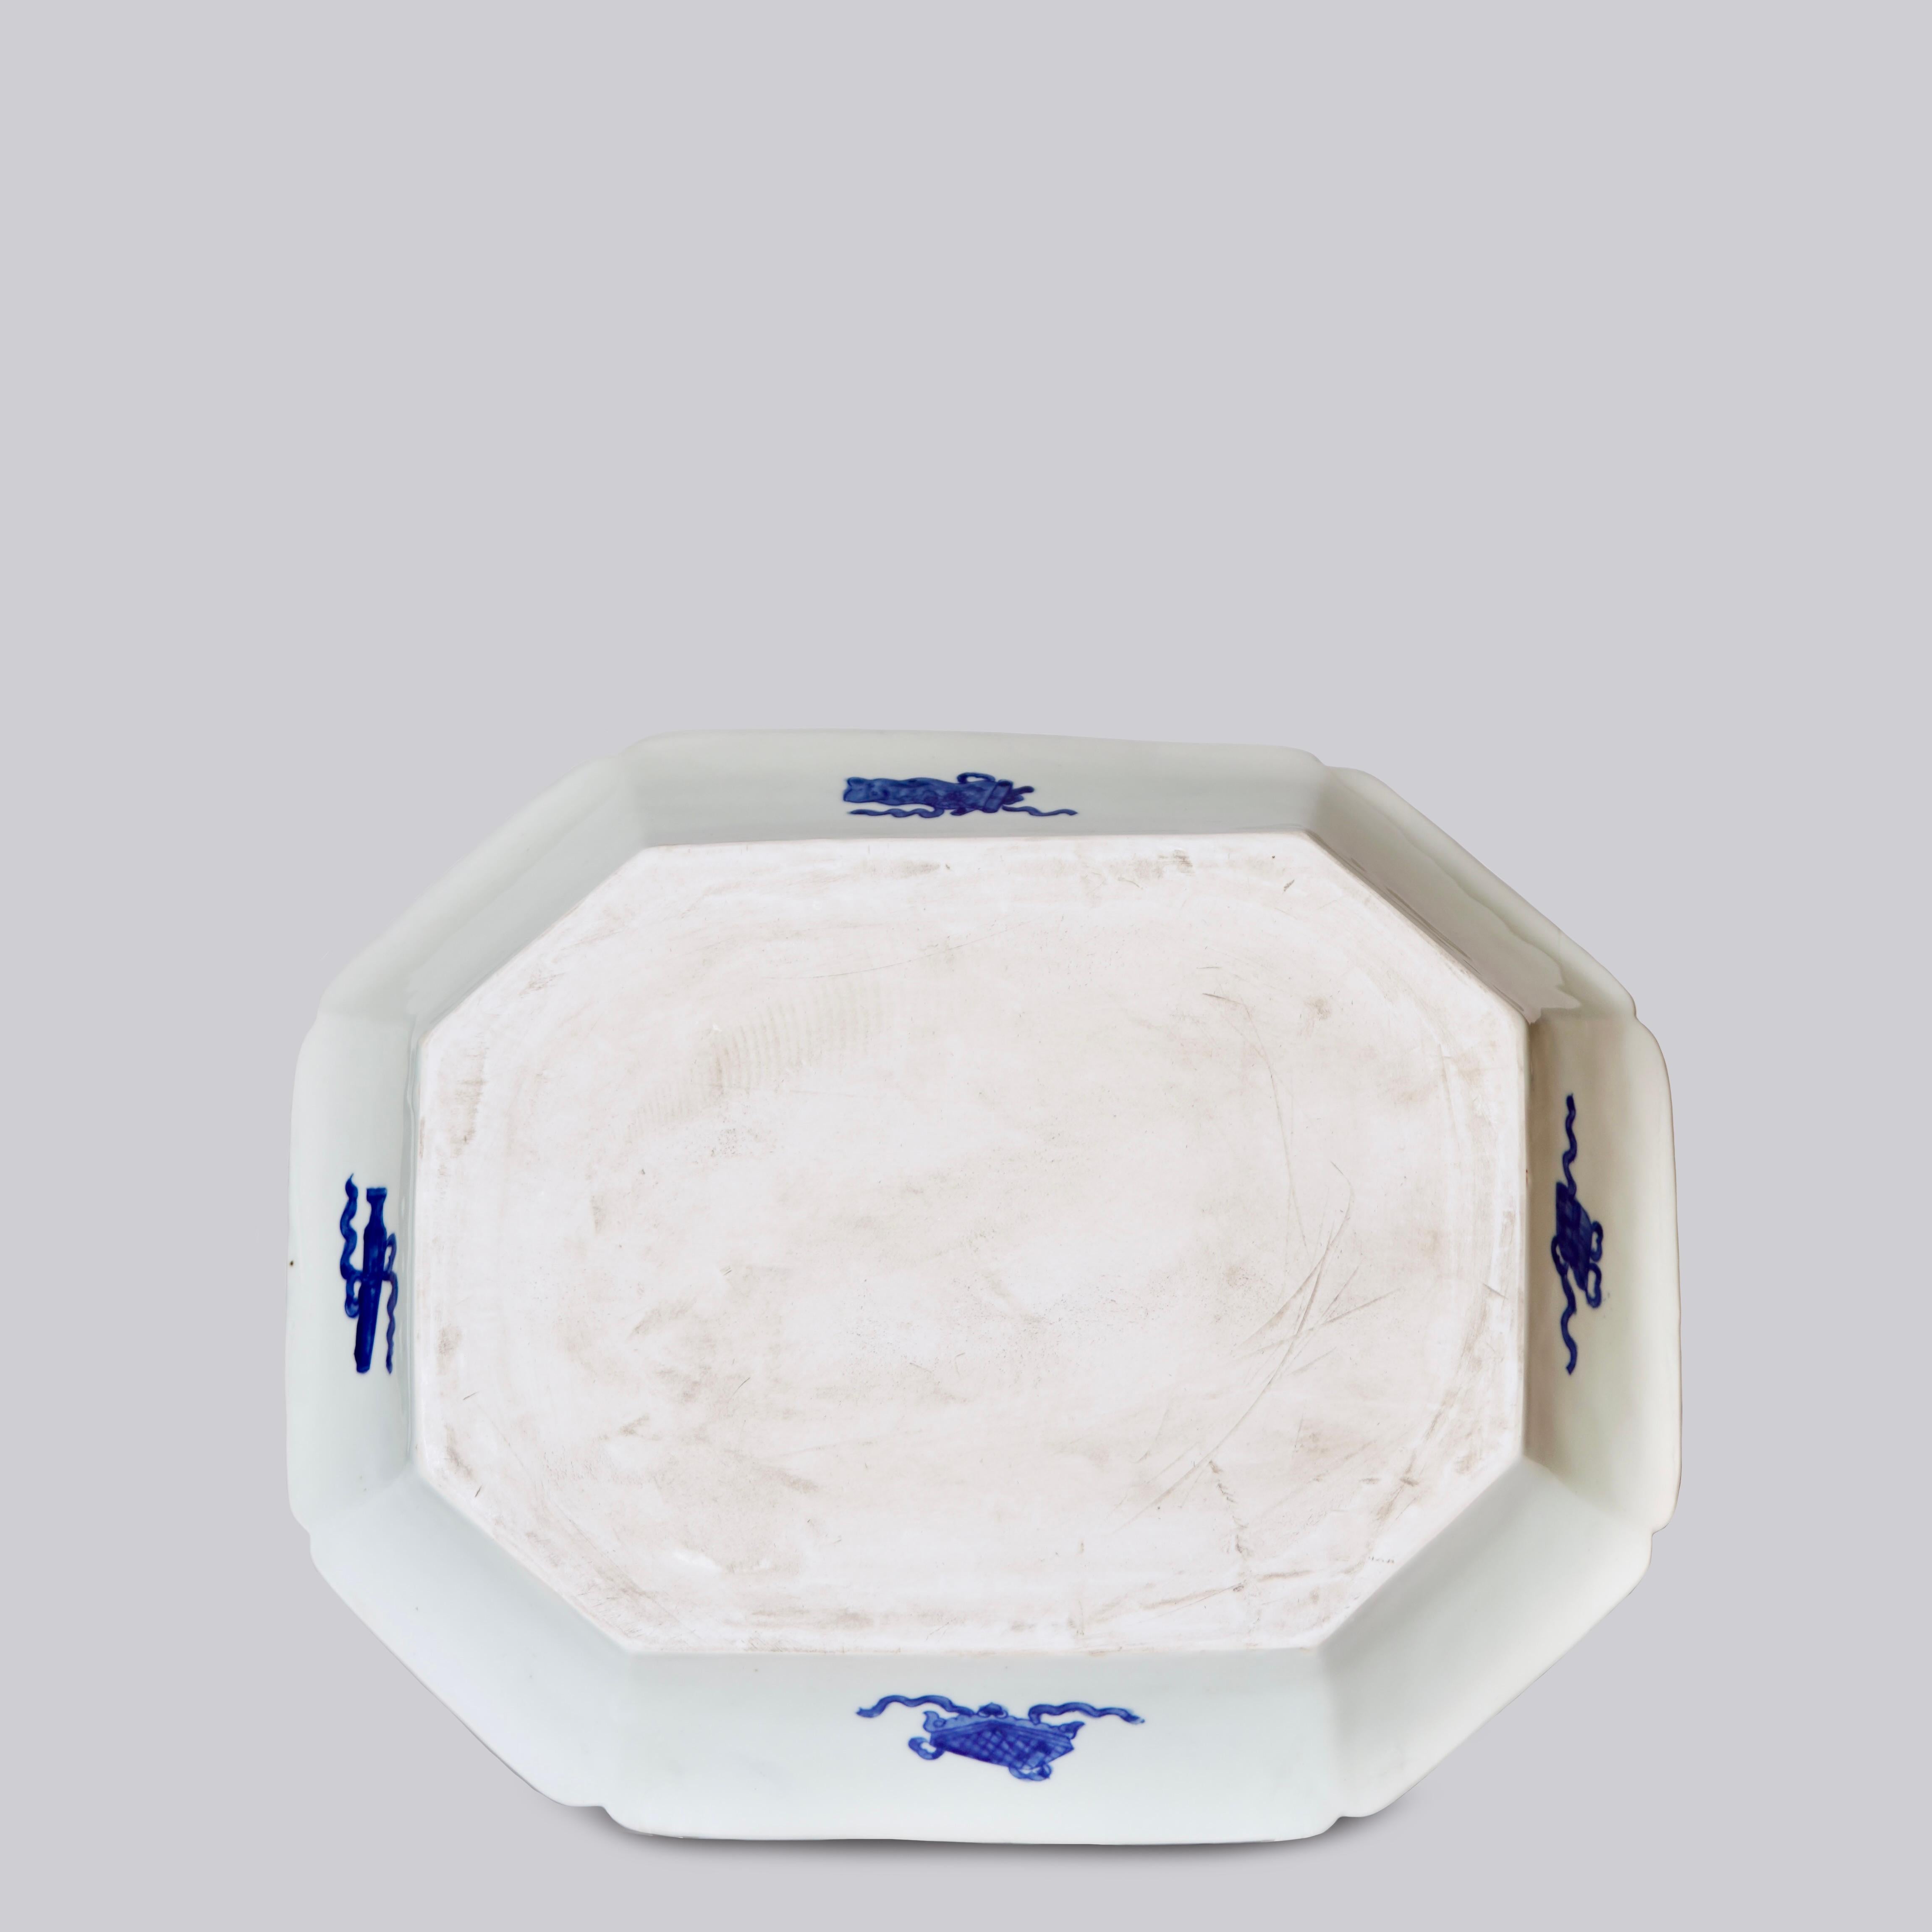 blue and white porcelain plates